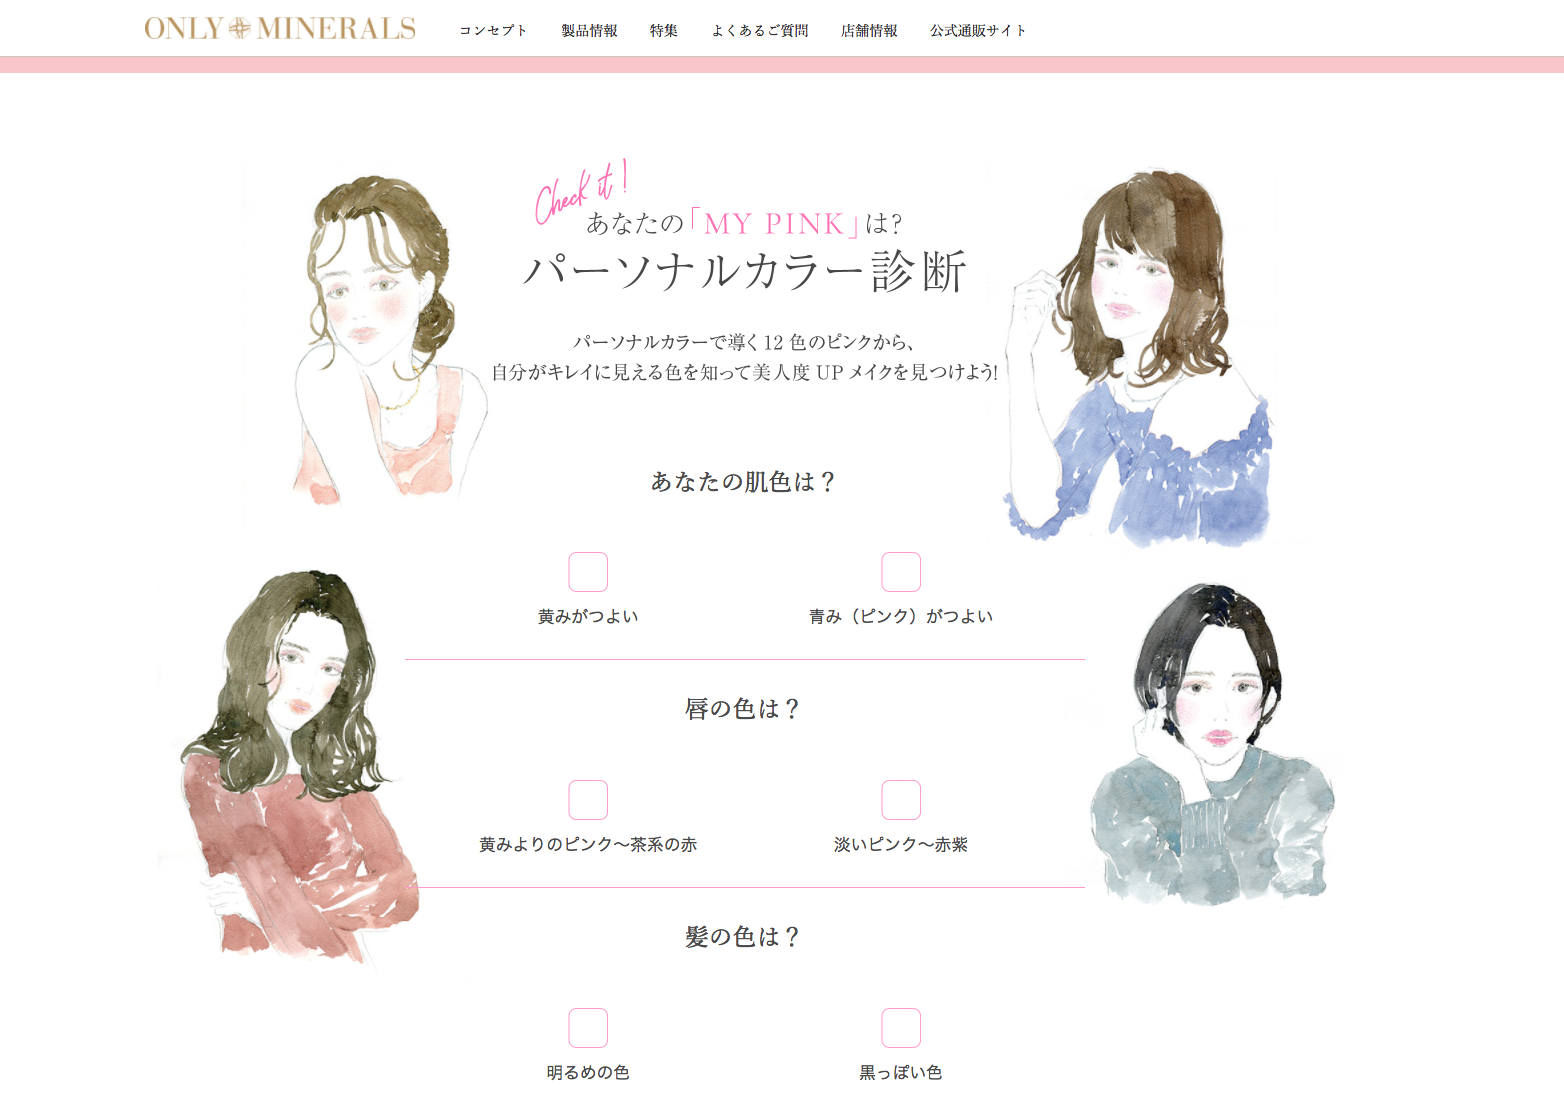  ONLY MINERALS Website and display adverts illustration ”My Pink Collection”  オンリーミネラルズ ウェブサイト、店頭広告イラストレーション 